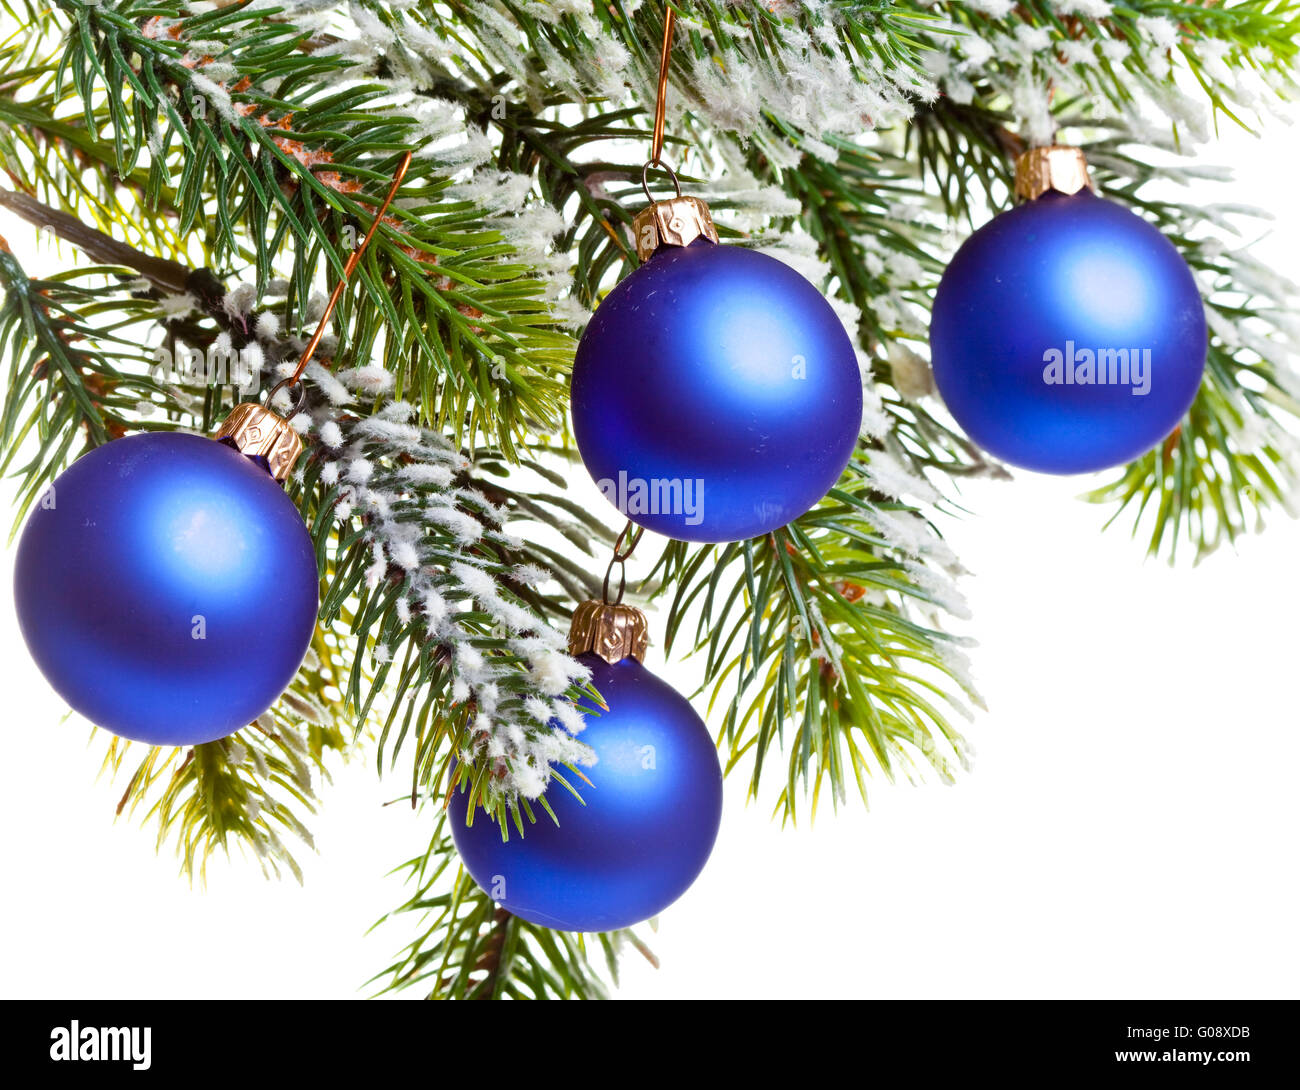 Dark blue New Year's balls on a snow-covered branc Stock Photo